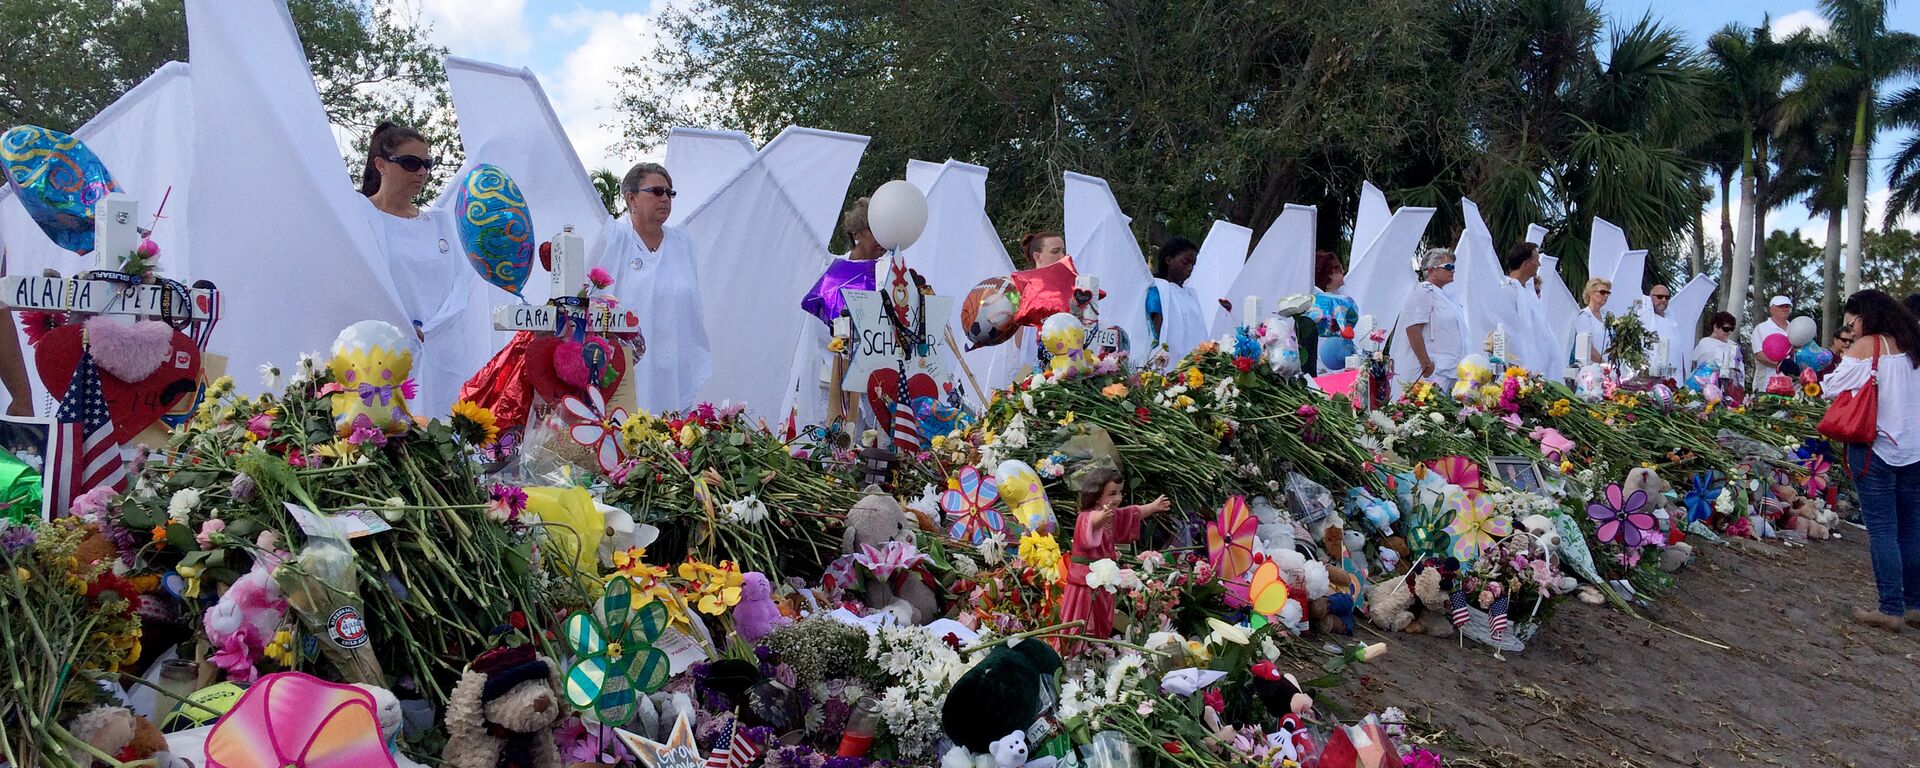 Seventeen people dressed as angels stand Sunday, Feb. 25, 2018, at the memorial outside Marjory Stoneman Douglas High School in Parkland, Fla., for those killed in a shooting on Feb. 14.  - Sputnik International, 1920, 15.02.2023